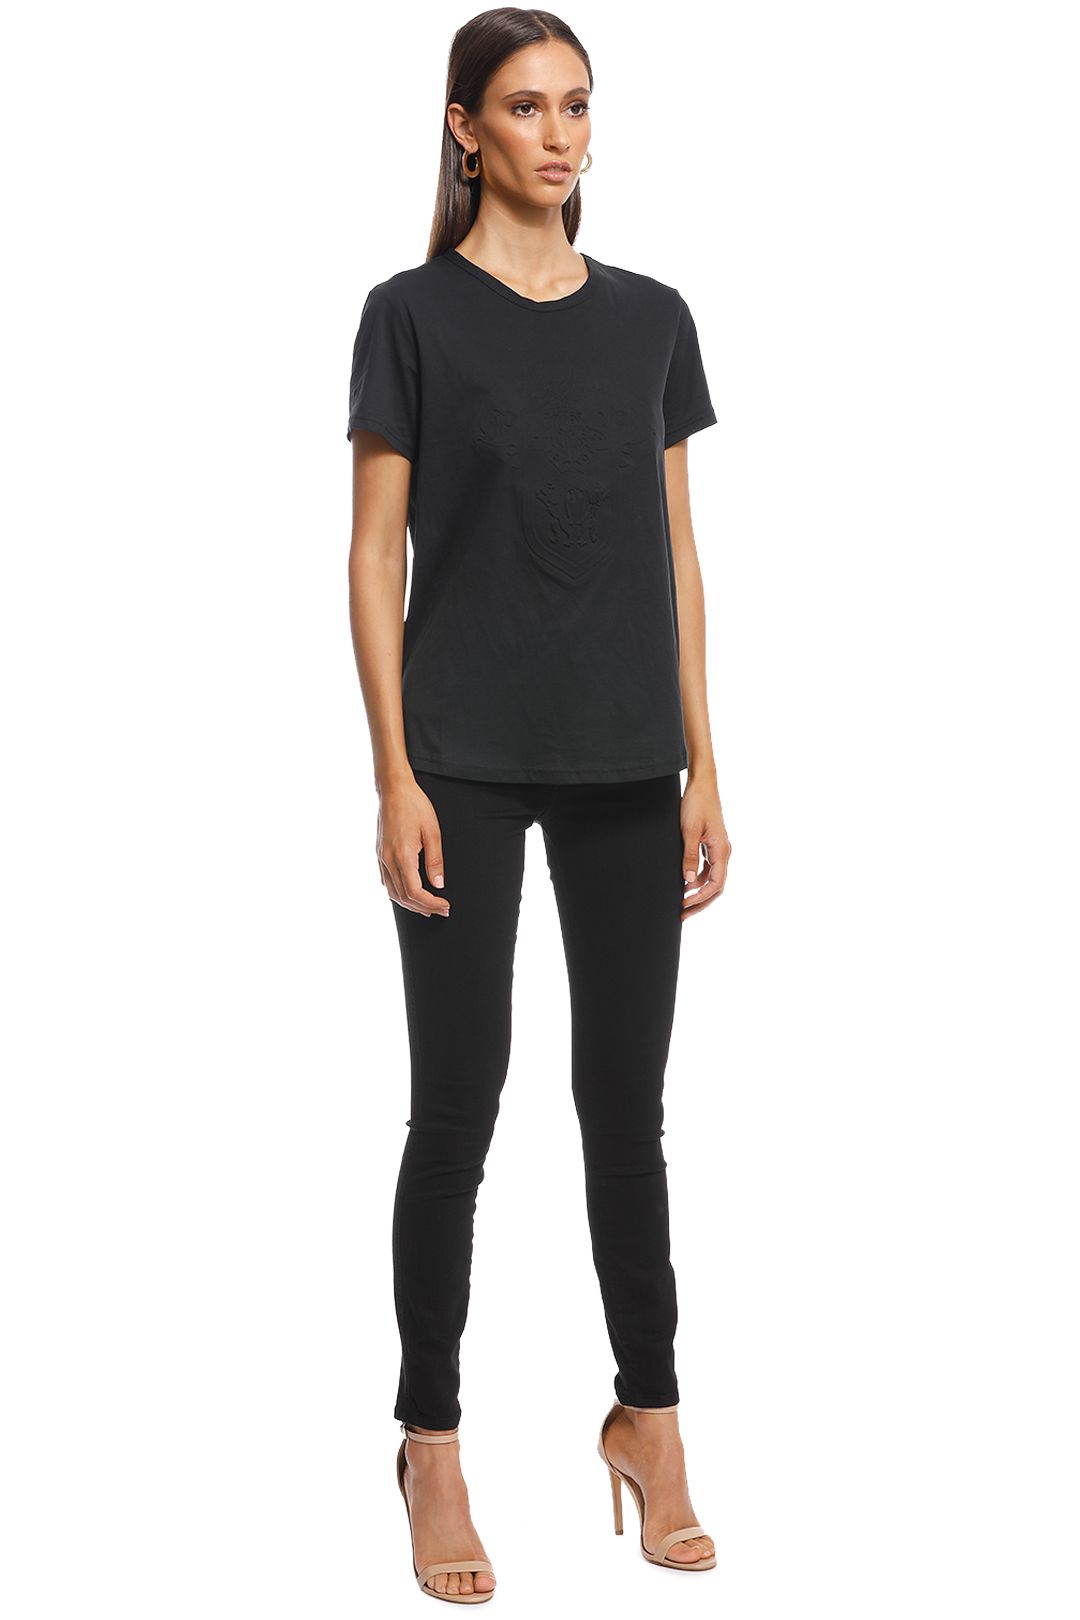 Camilla and Marc - Fay Crest Tee - Black - Side